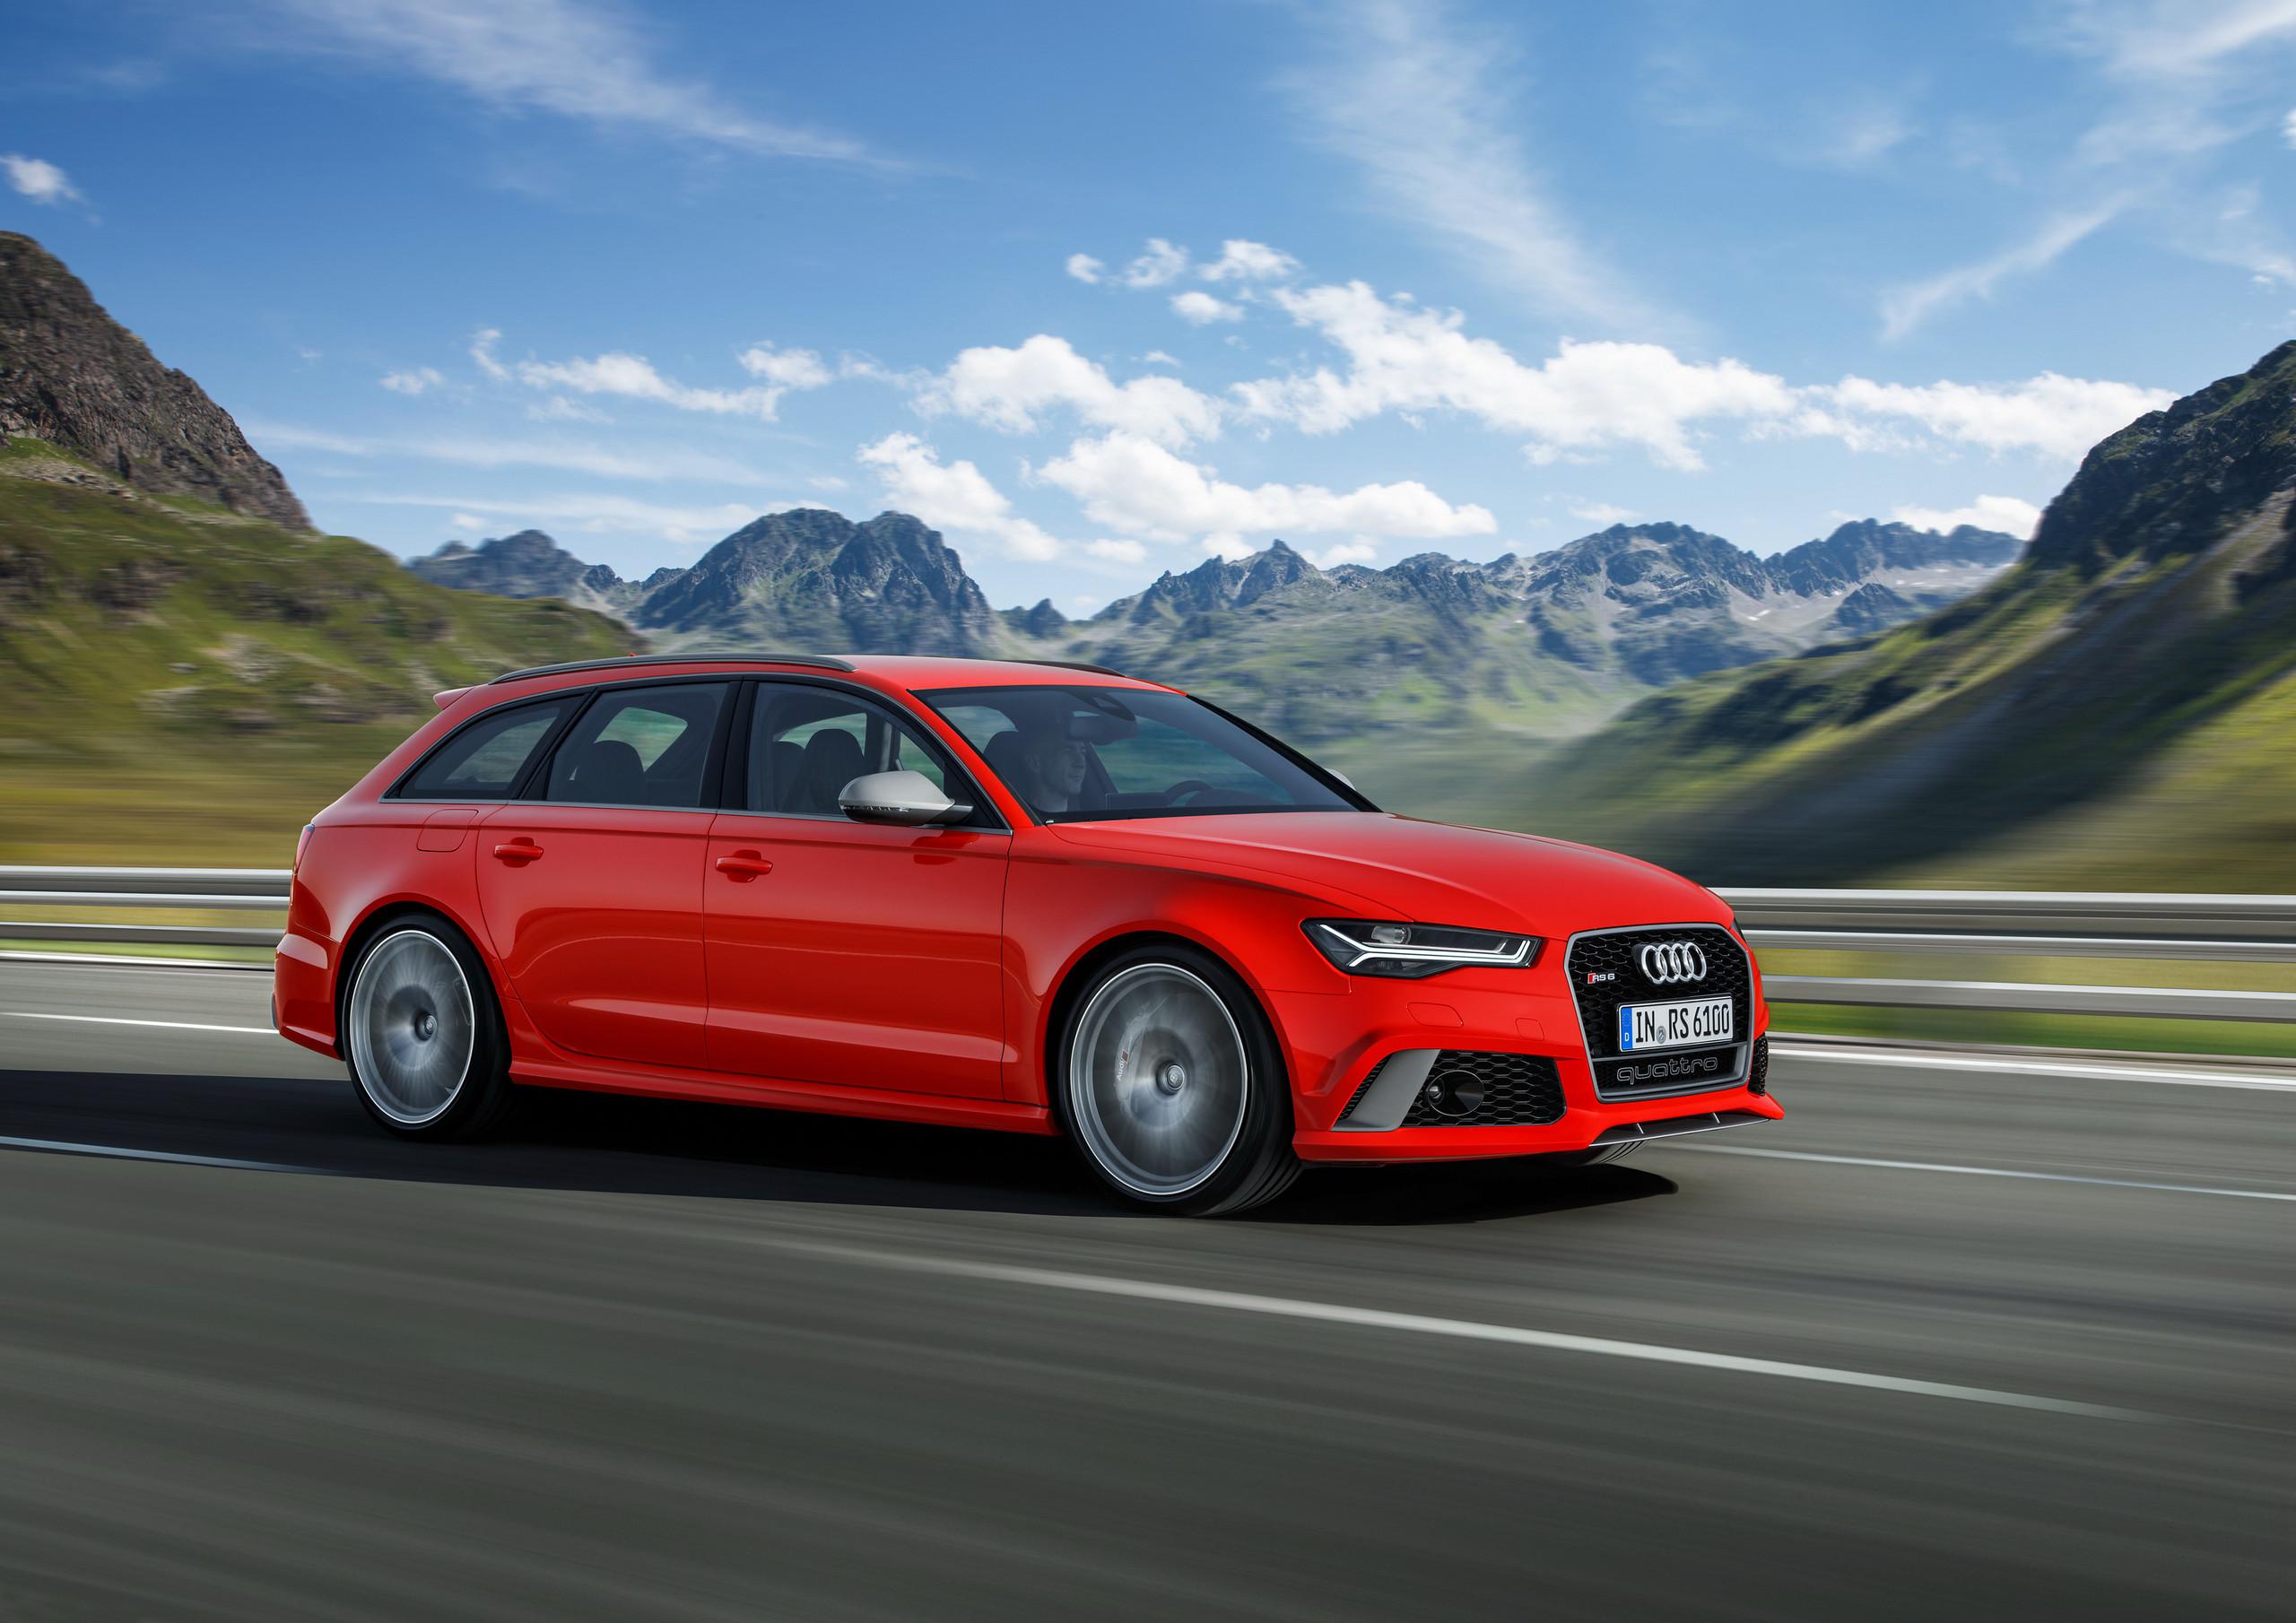 Audi RS6 Wallpaper, Picture, Image